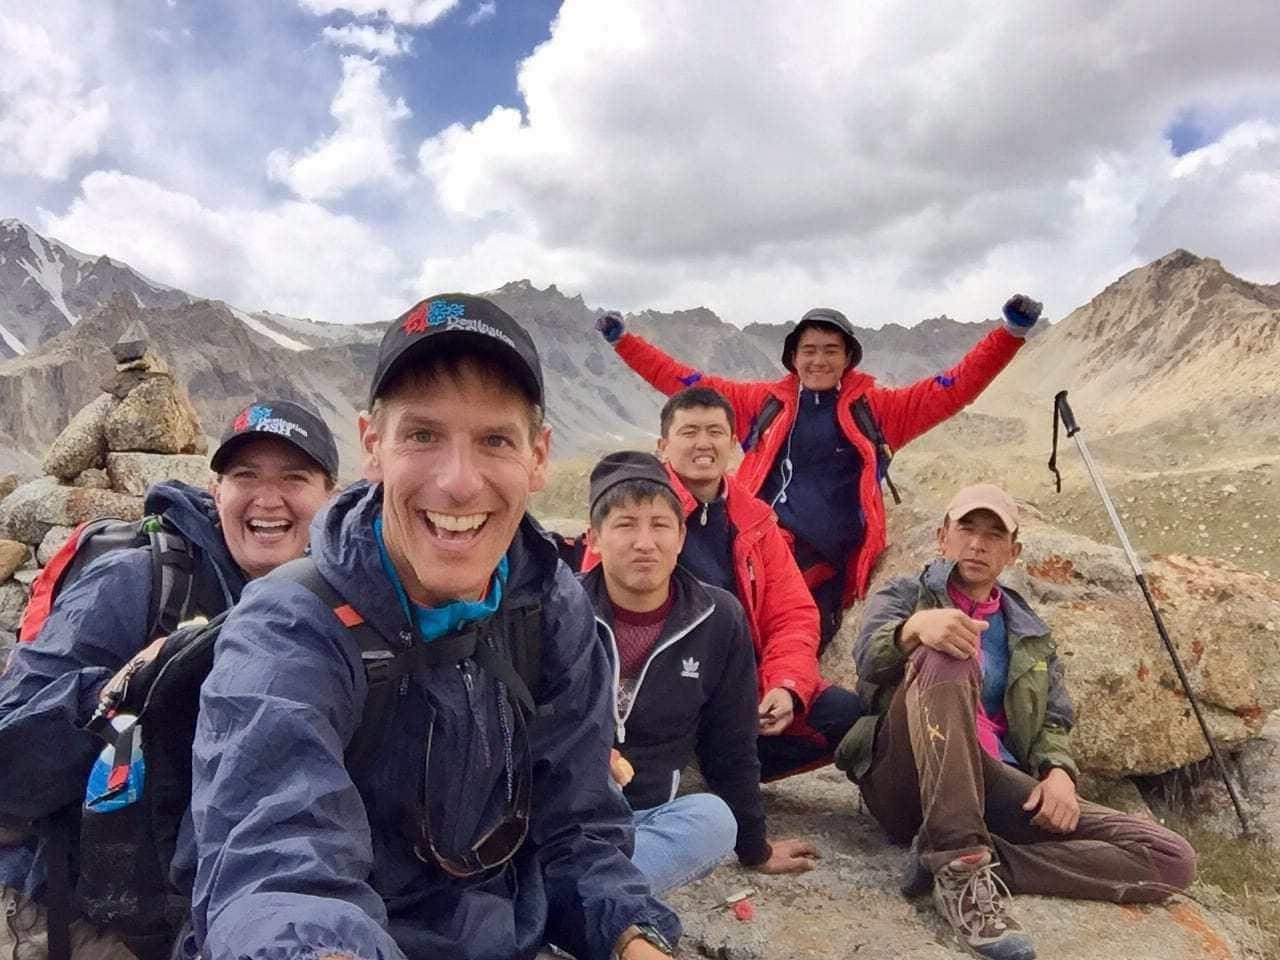 Trekking in the Alay Mountains, Kyrgyzstan - Trekking Guides